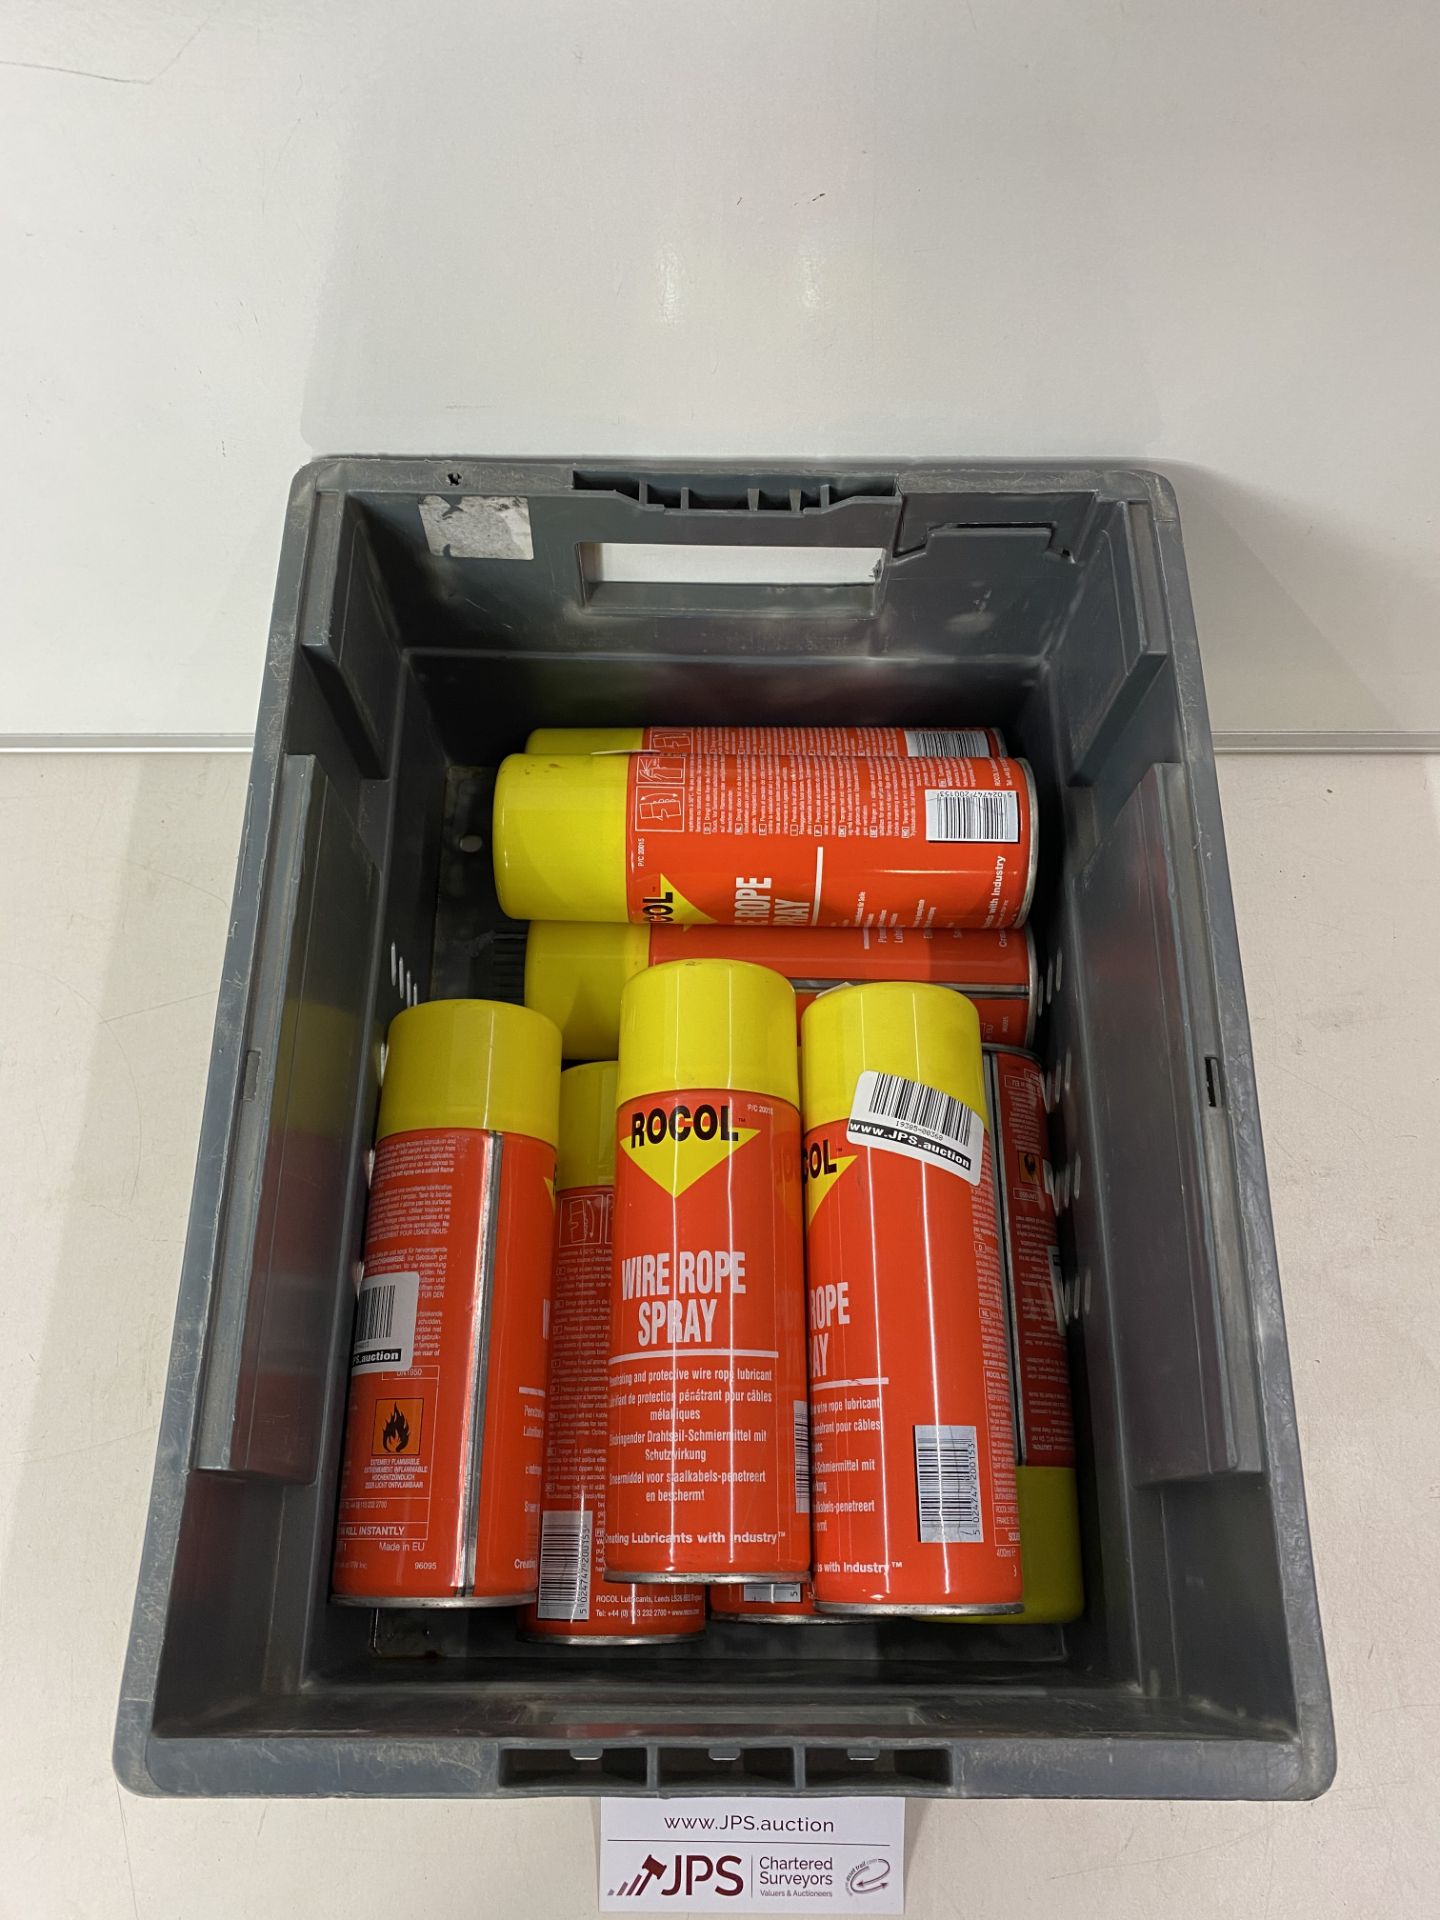 9 x ROCOL 20015 WIRE ROPE SPRAY CAN 400ml - Image 2 of 2